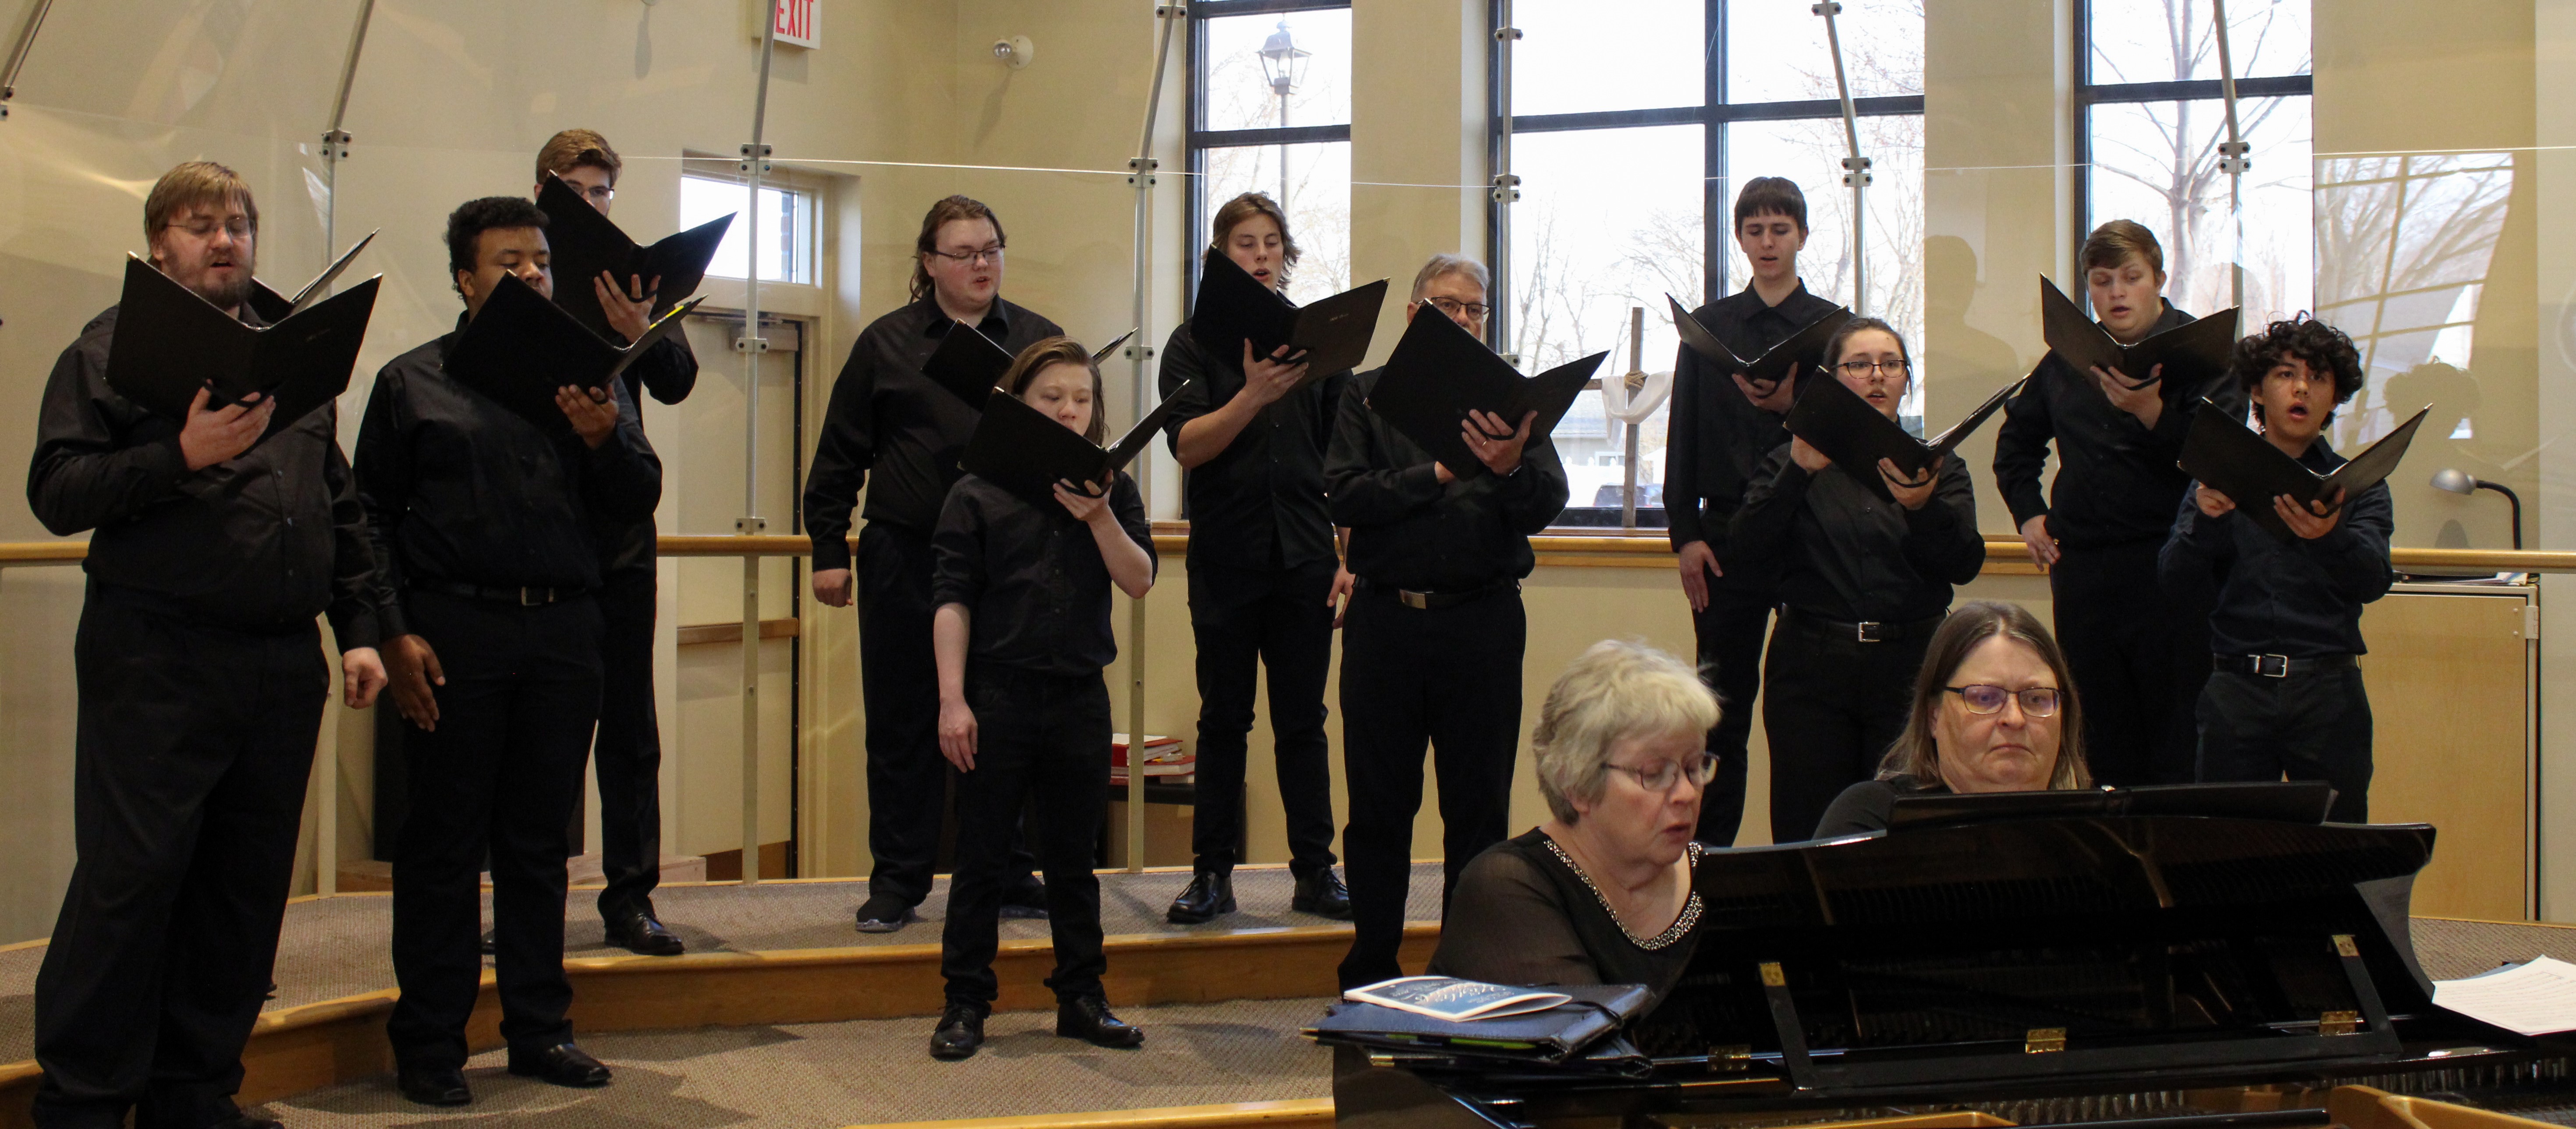 This is a picture of the SMSU Glee Club in performance.